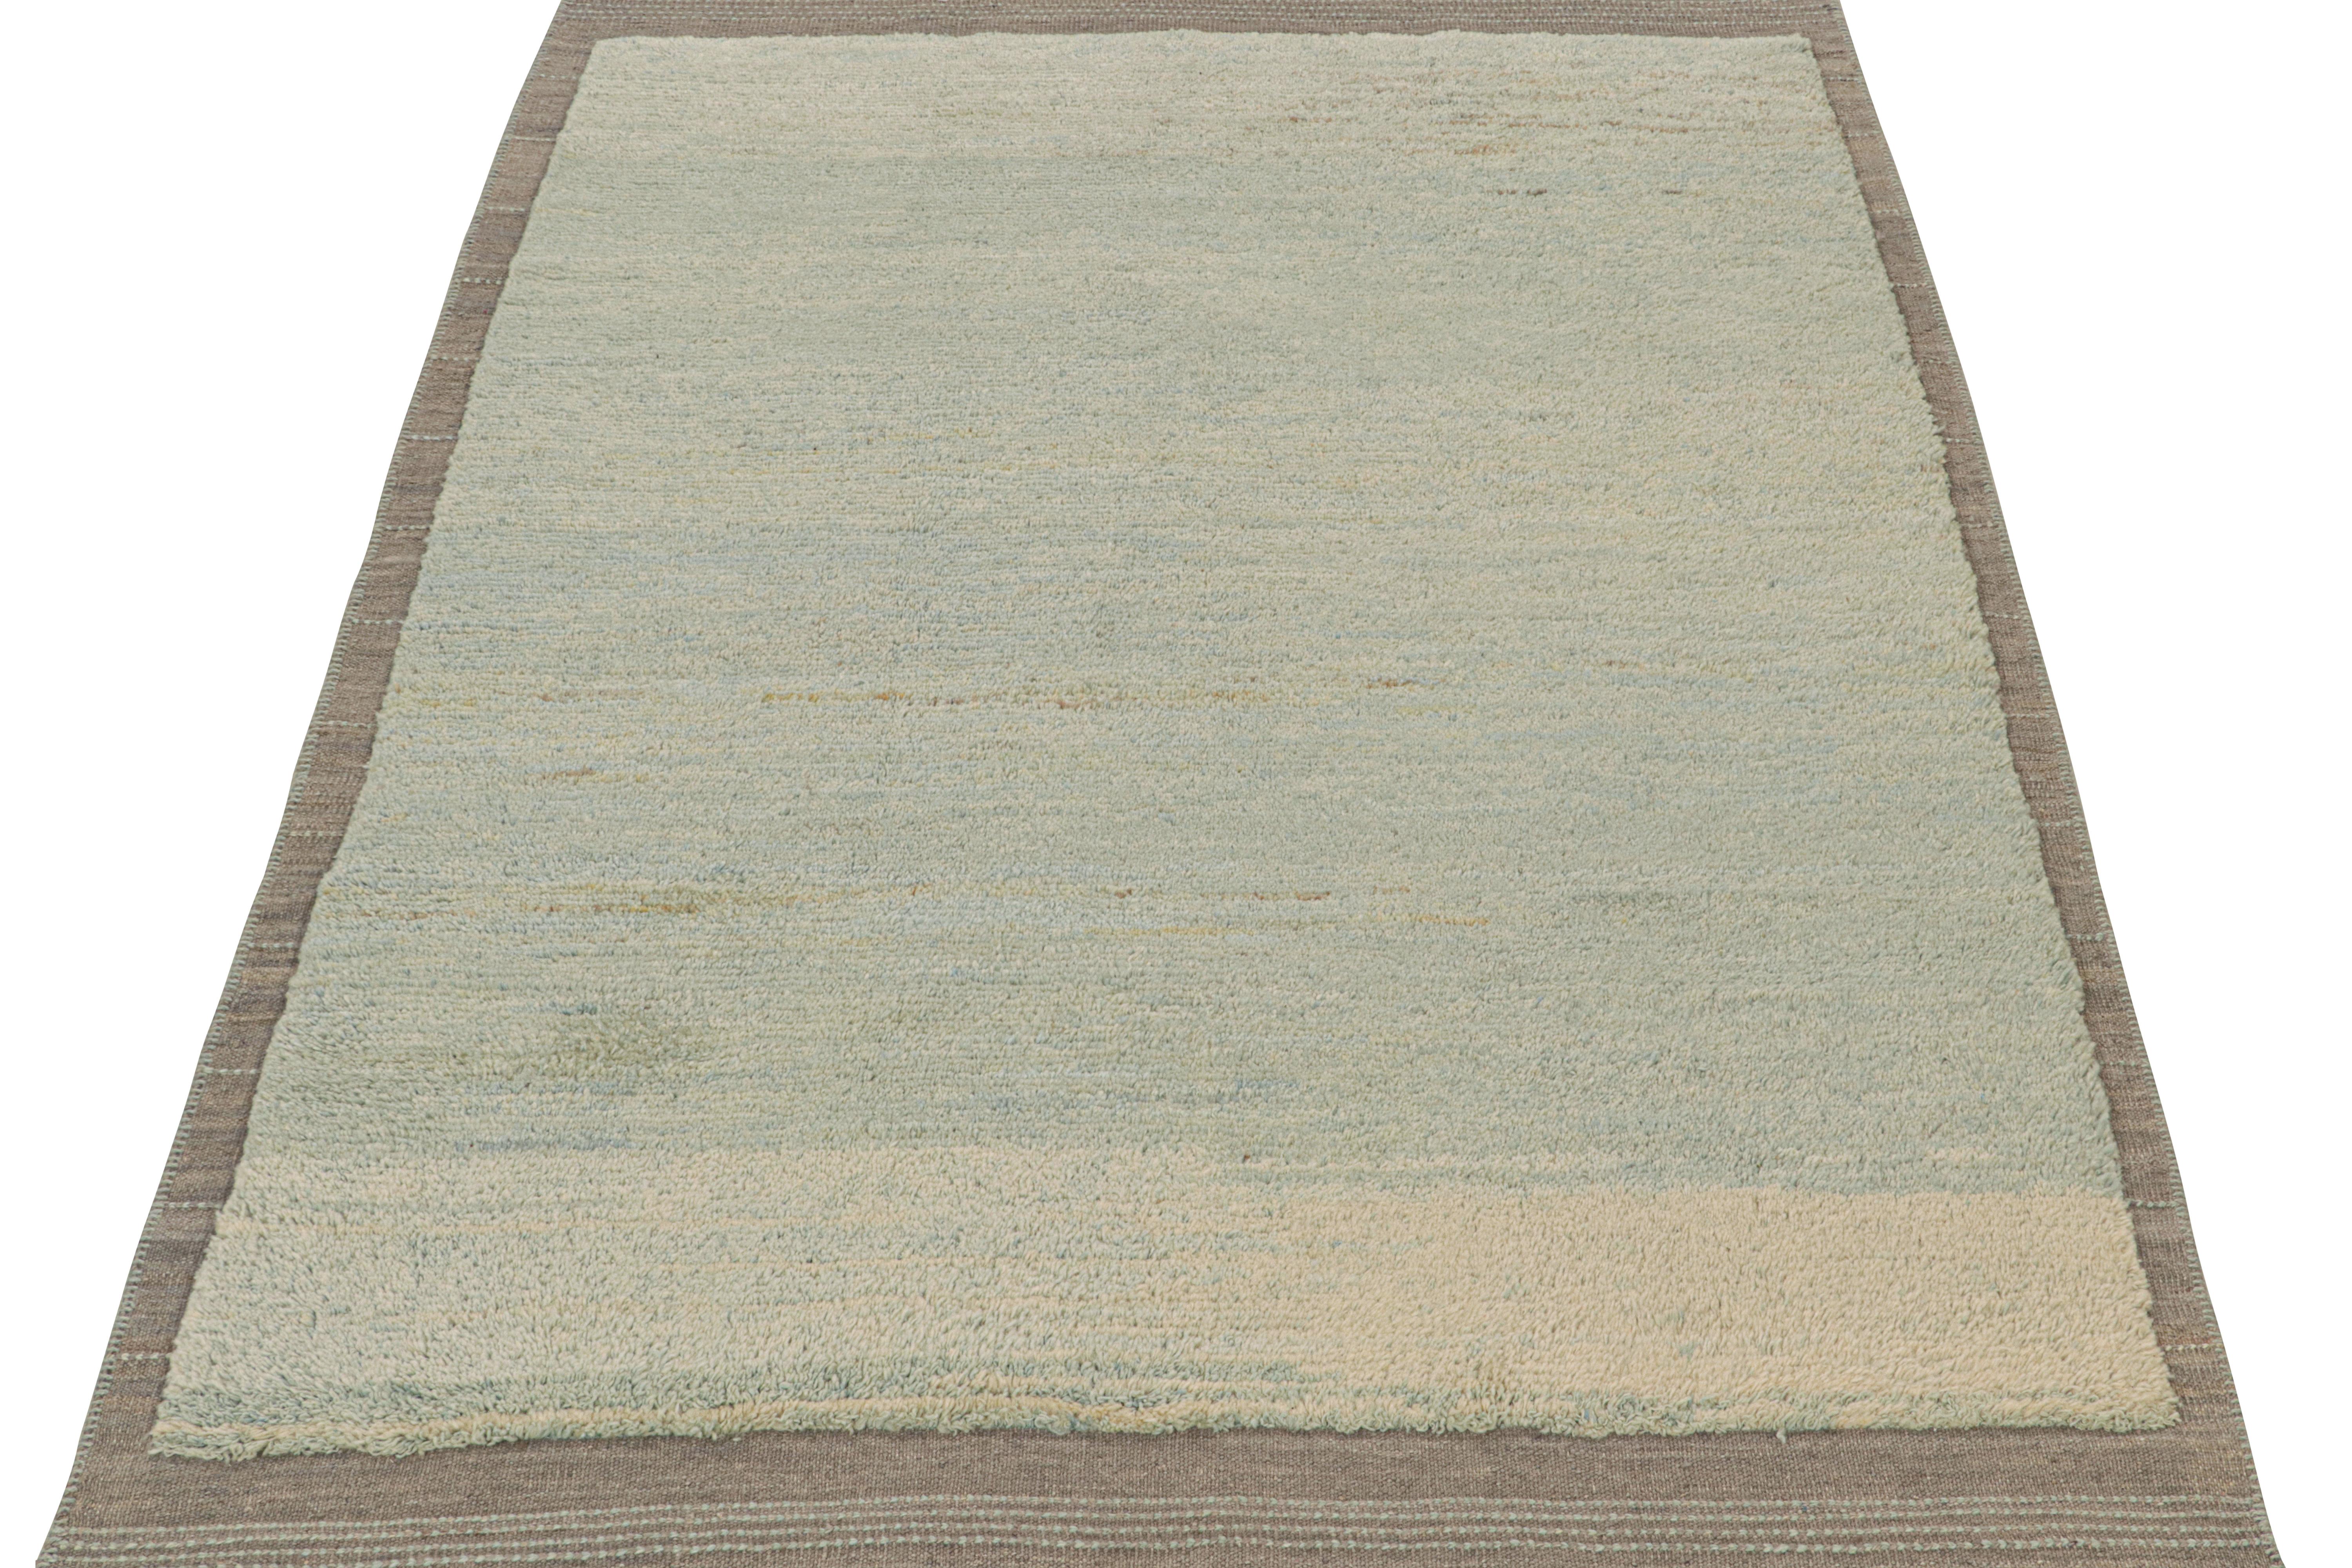 Handwoven in wool, a 6x8 piece is from a bold new line of contemporary rugs by Rug & Kilim.

Further On the Design:

This new addition to “Rez Kilim” is a play of pile and flat weave together, as seen in the sky blue field and gray border.